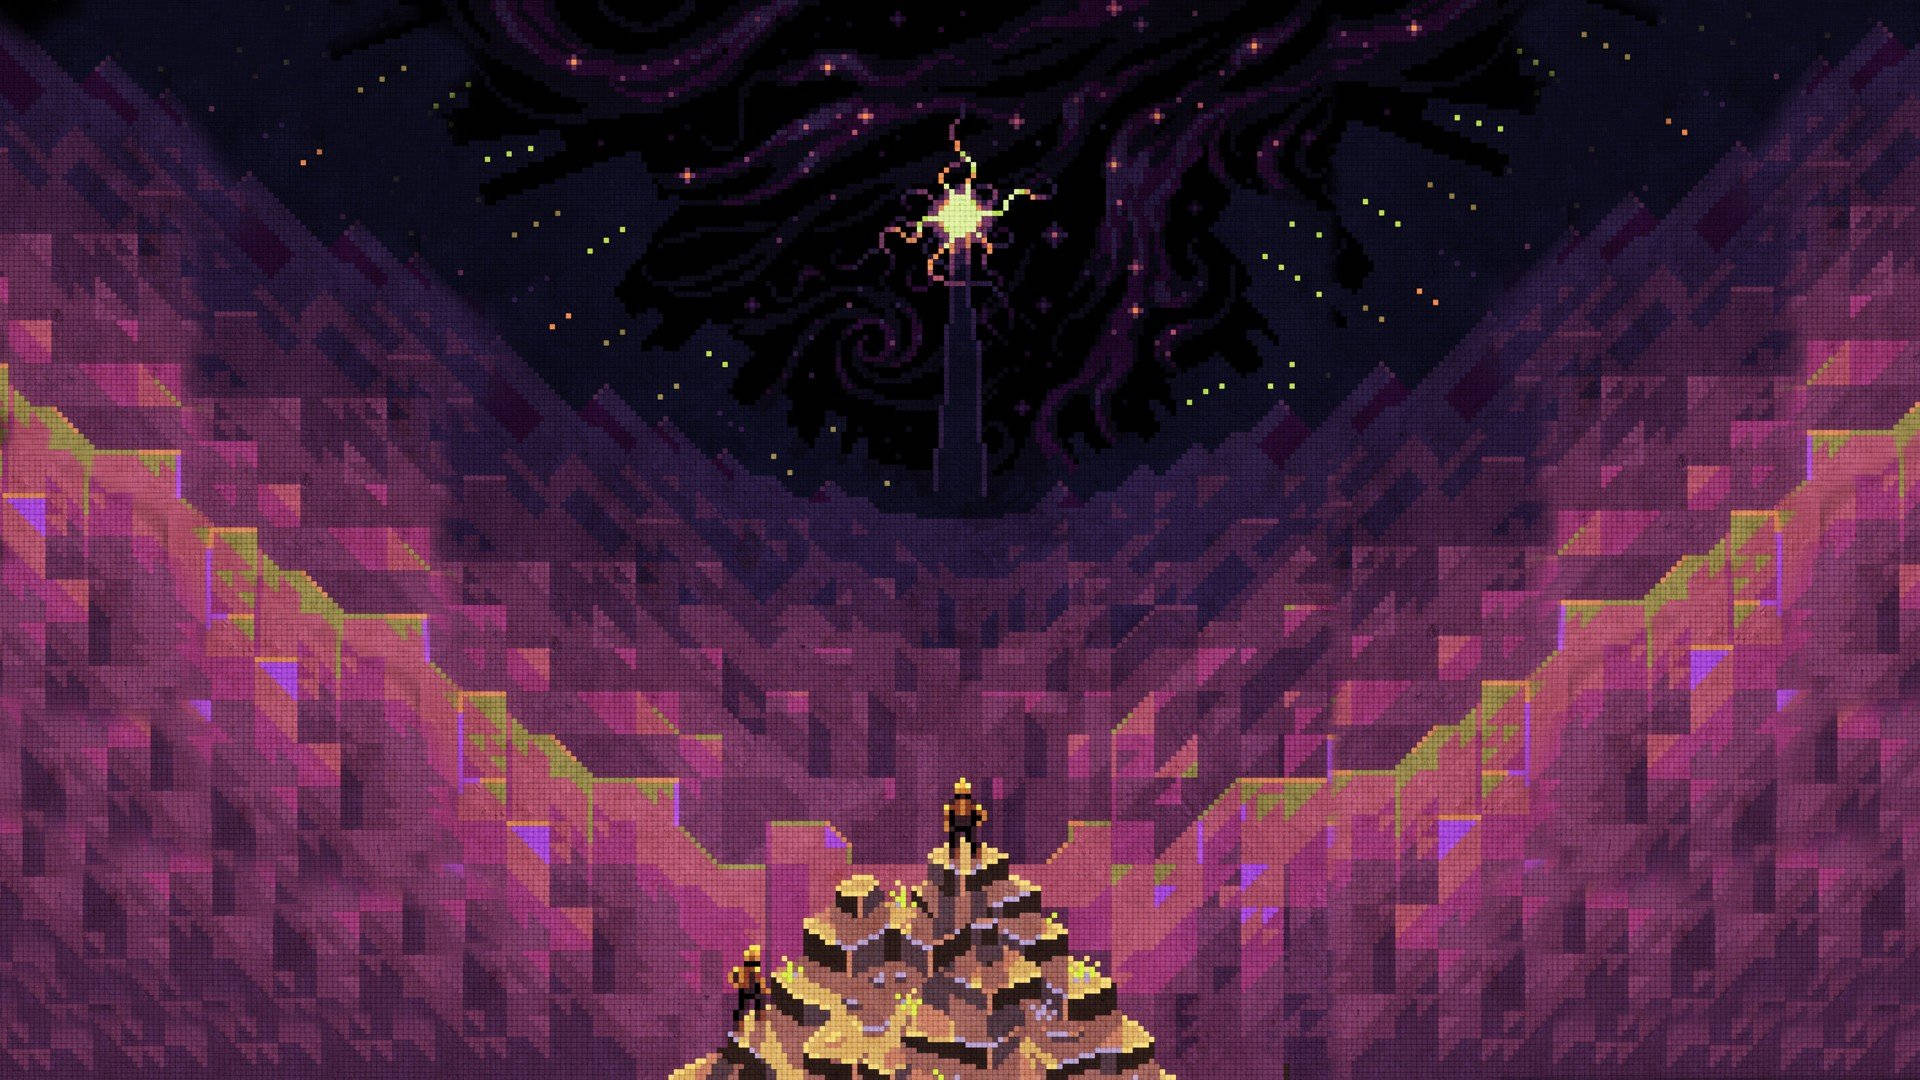 A Purple And Purple Pixel Art Image Of A Mountain Wallpaper